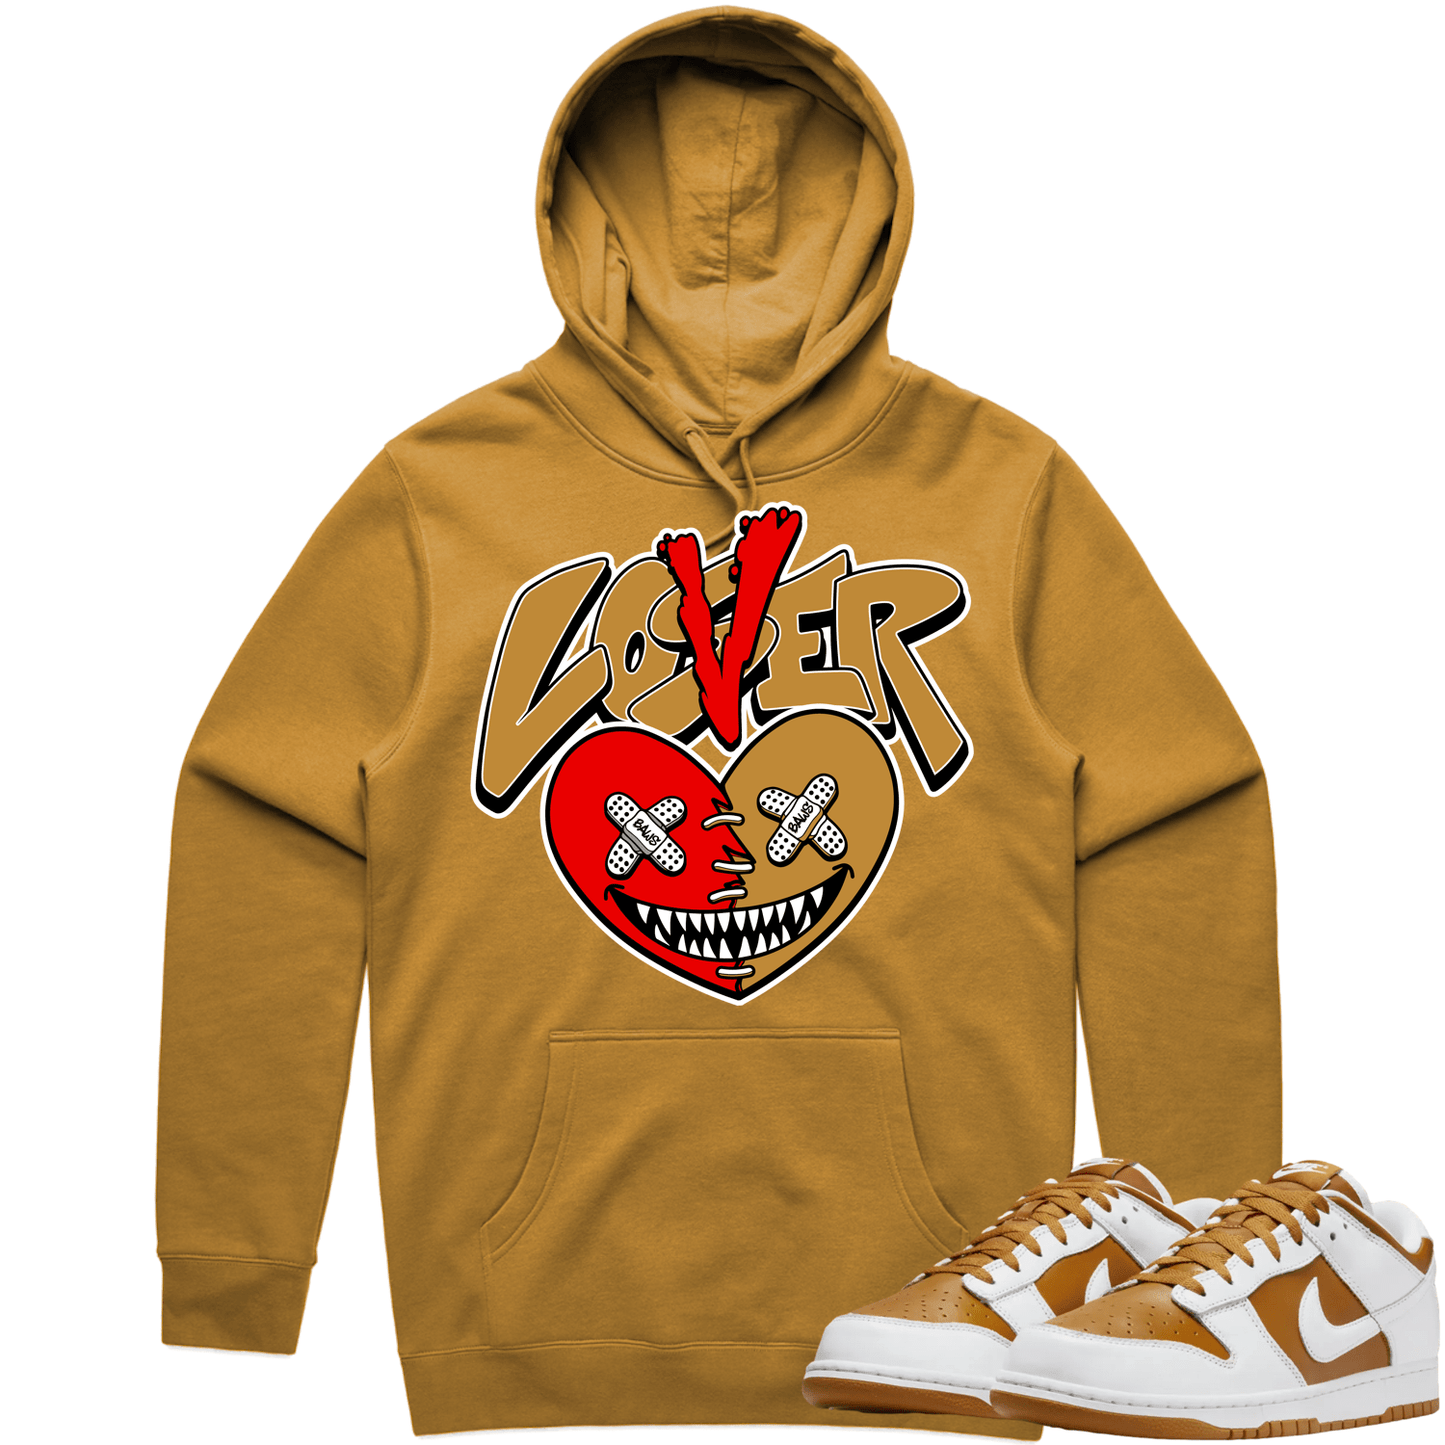 Curry Dunks Hoodie - Dunks Hoodies - Wheat Lover Loser